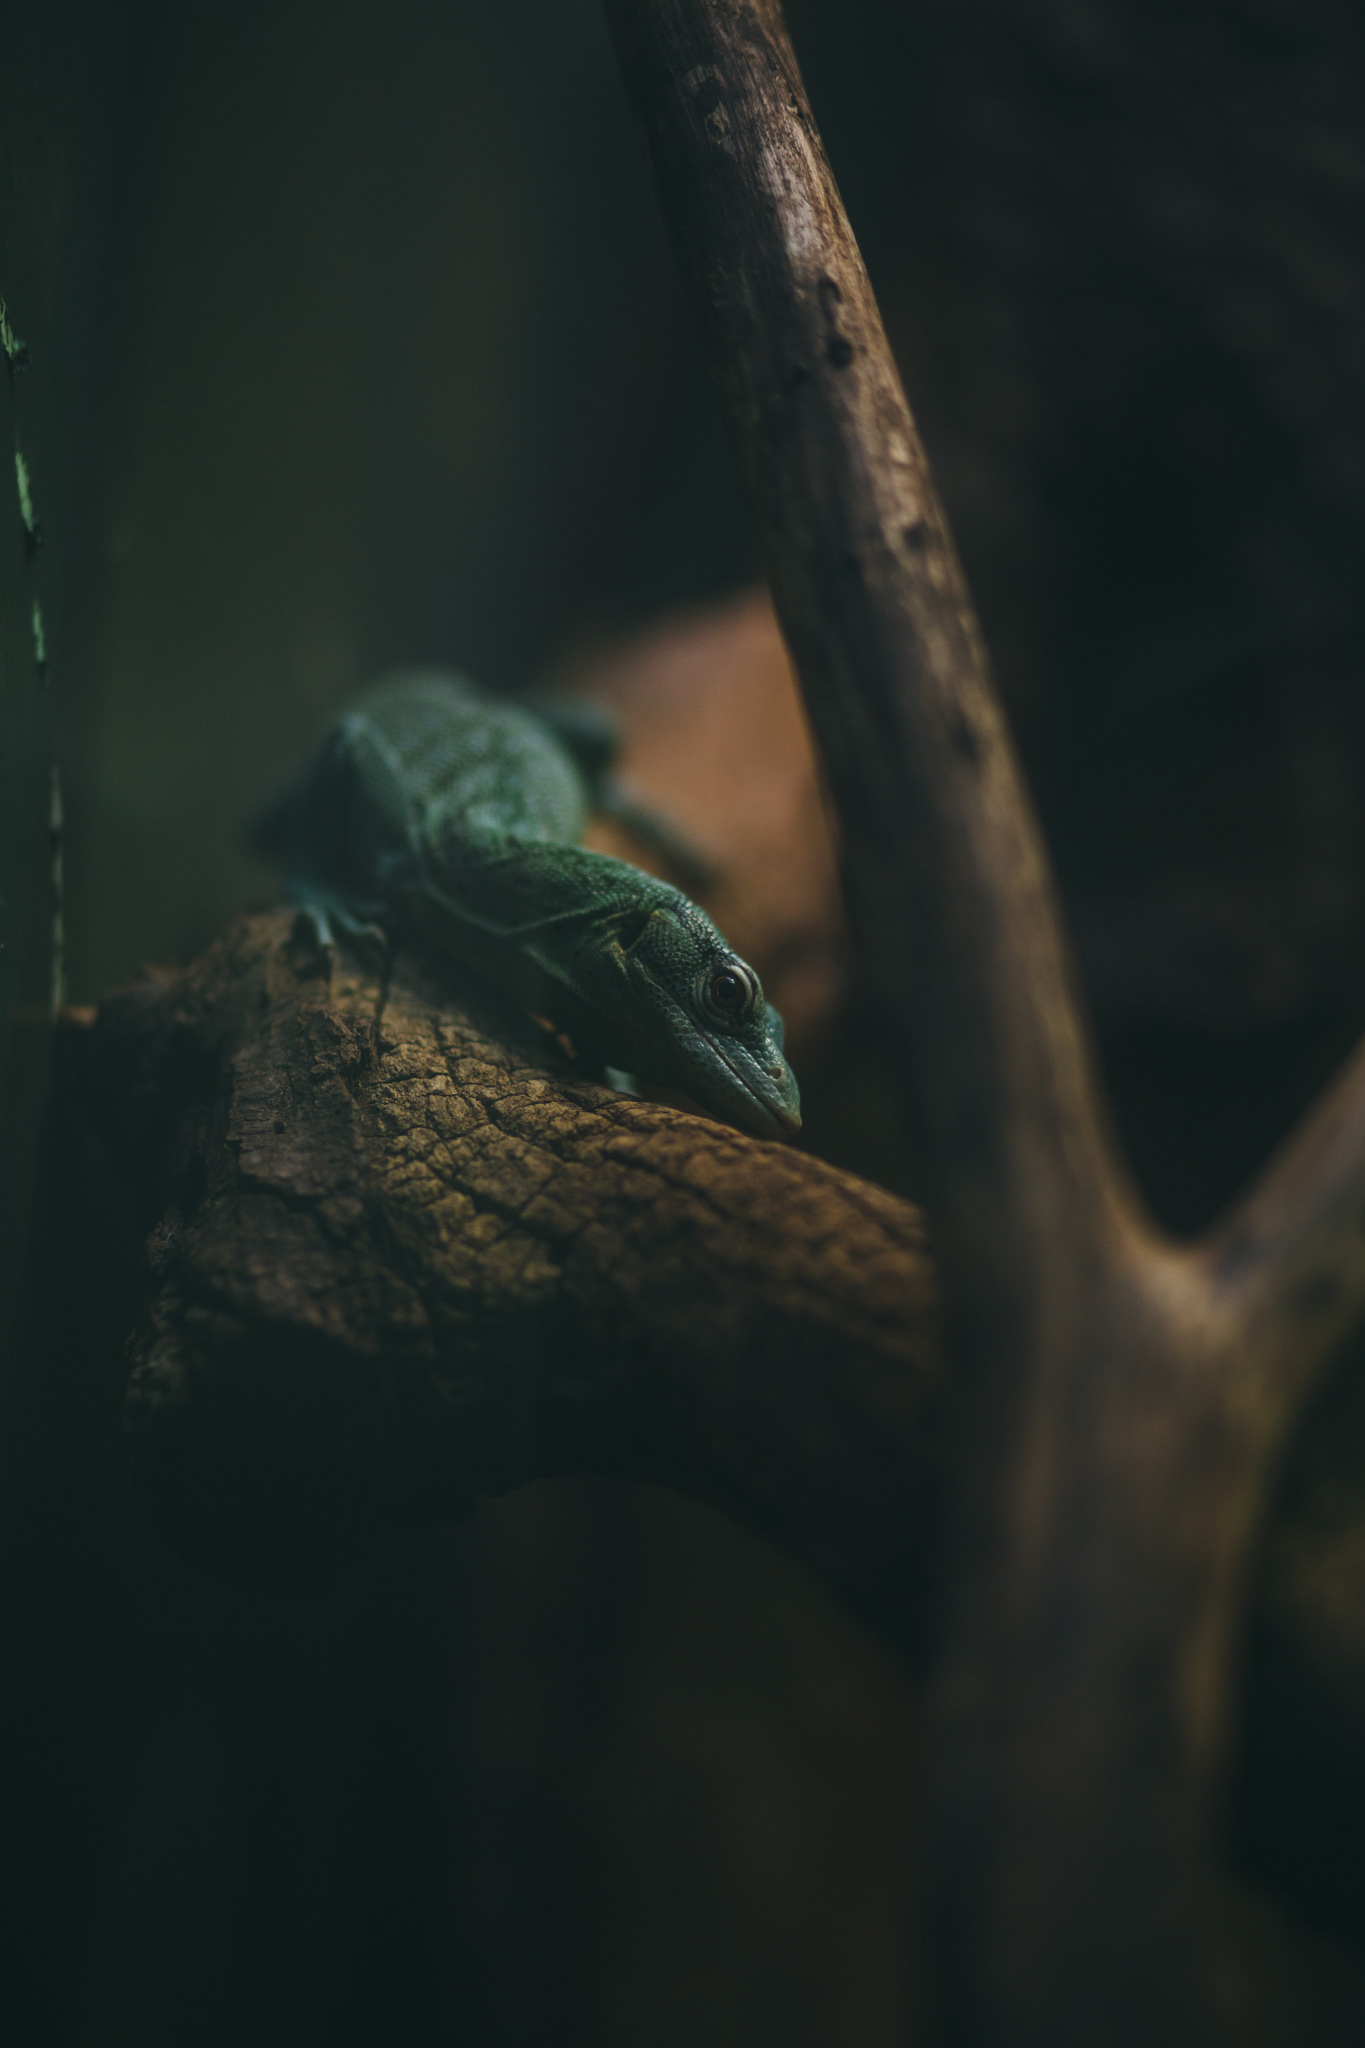 Green lizard on branch at Smithsonian Zoo